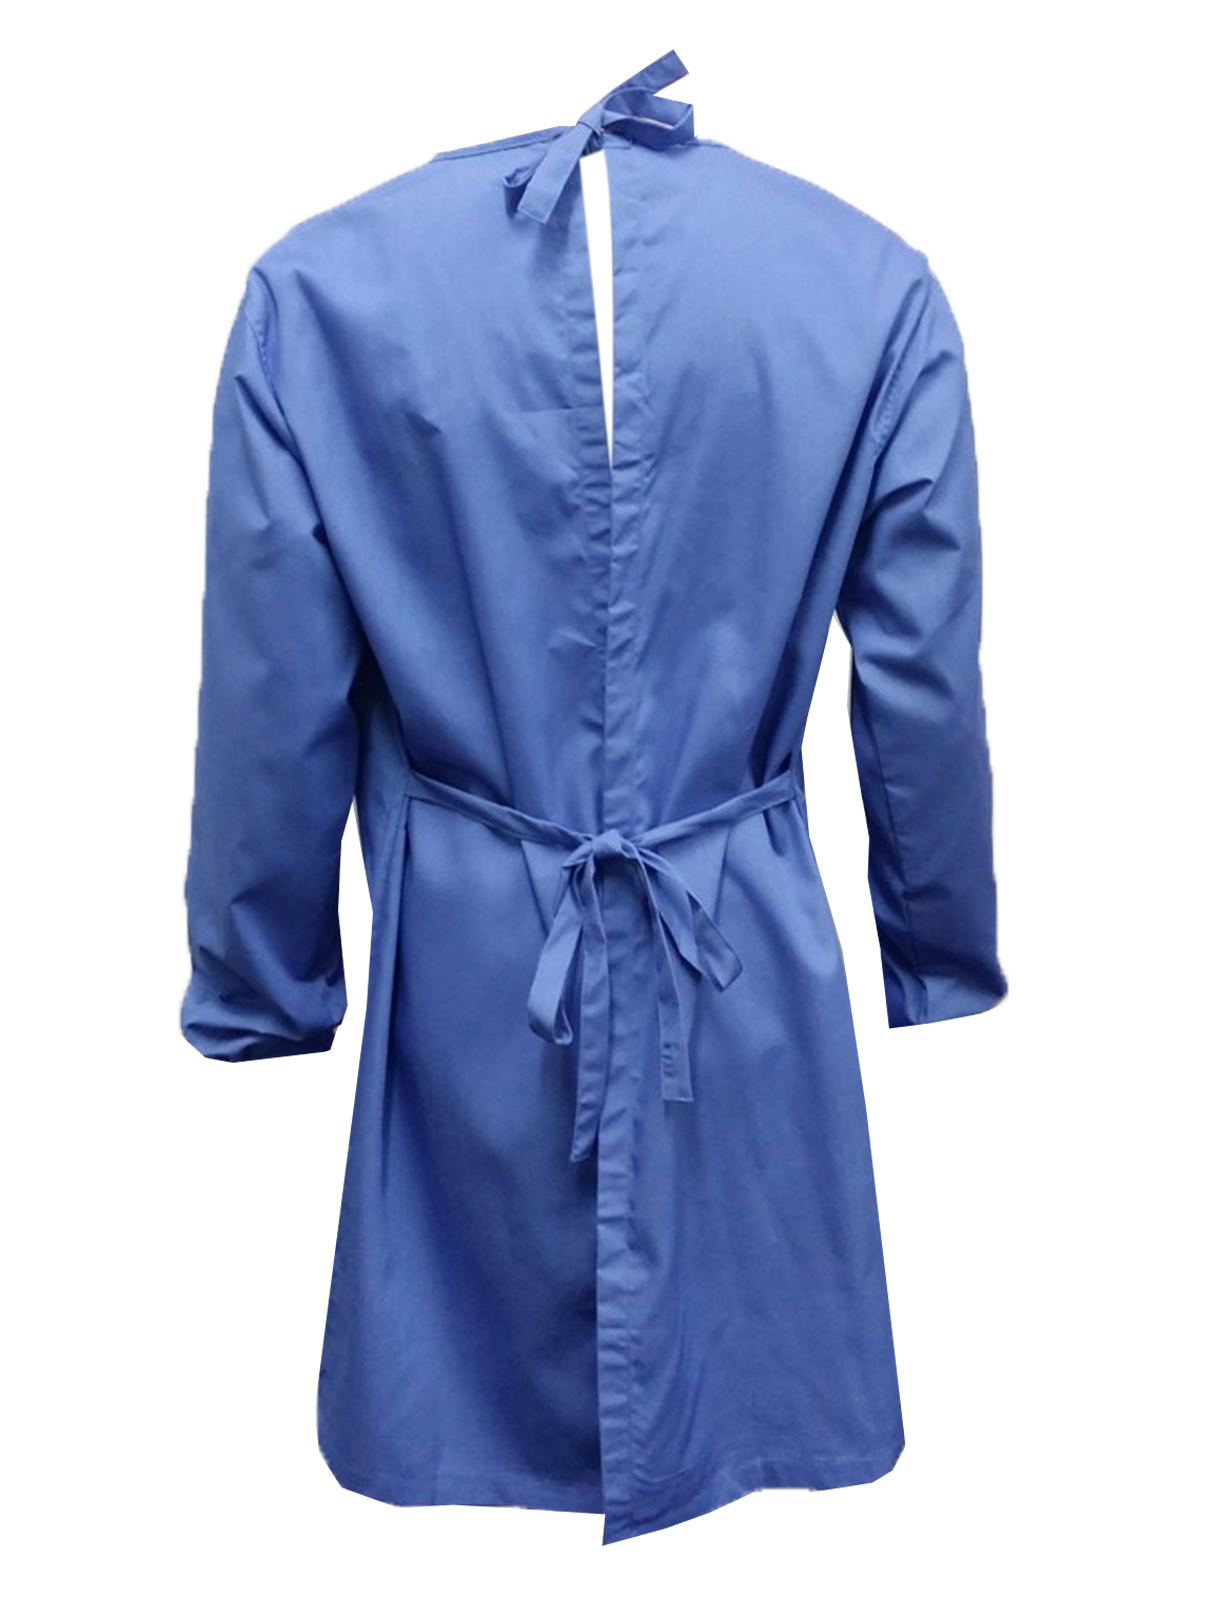 BKMDG001 – Customized Long Sleeve Medical Gown